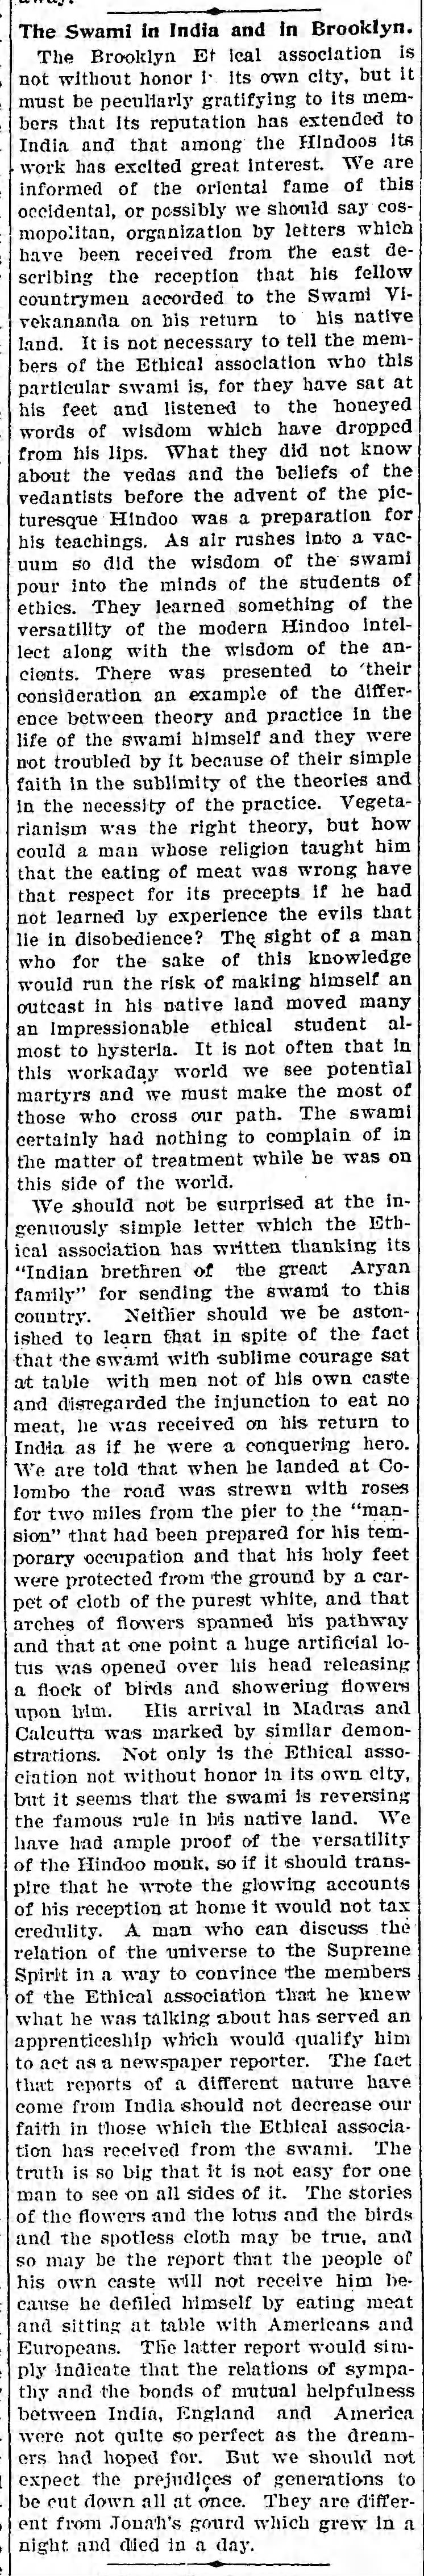 ?1897_04_Apl 09_Swami in India_Brooklyn Daily Eagle